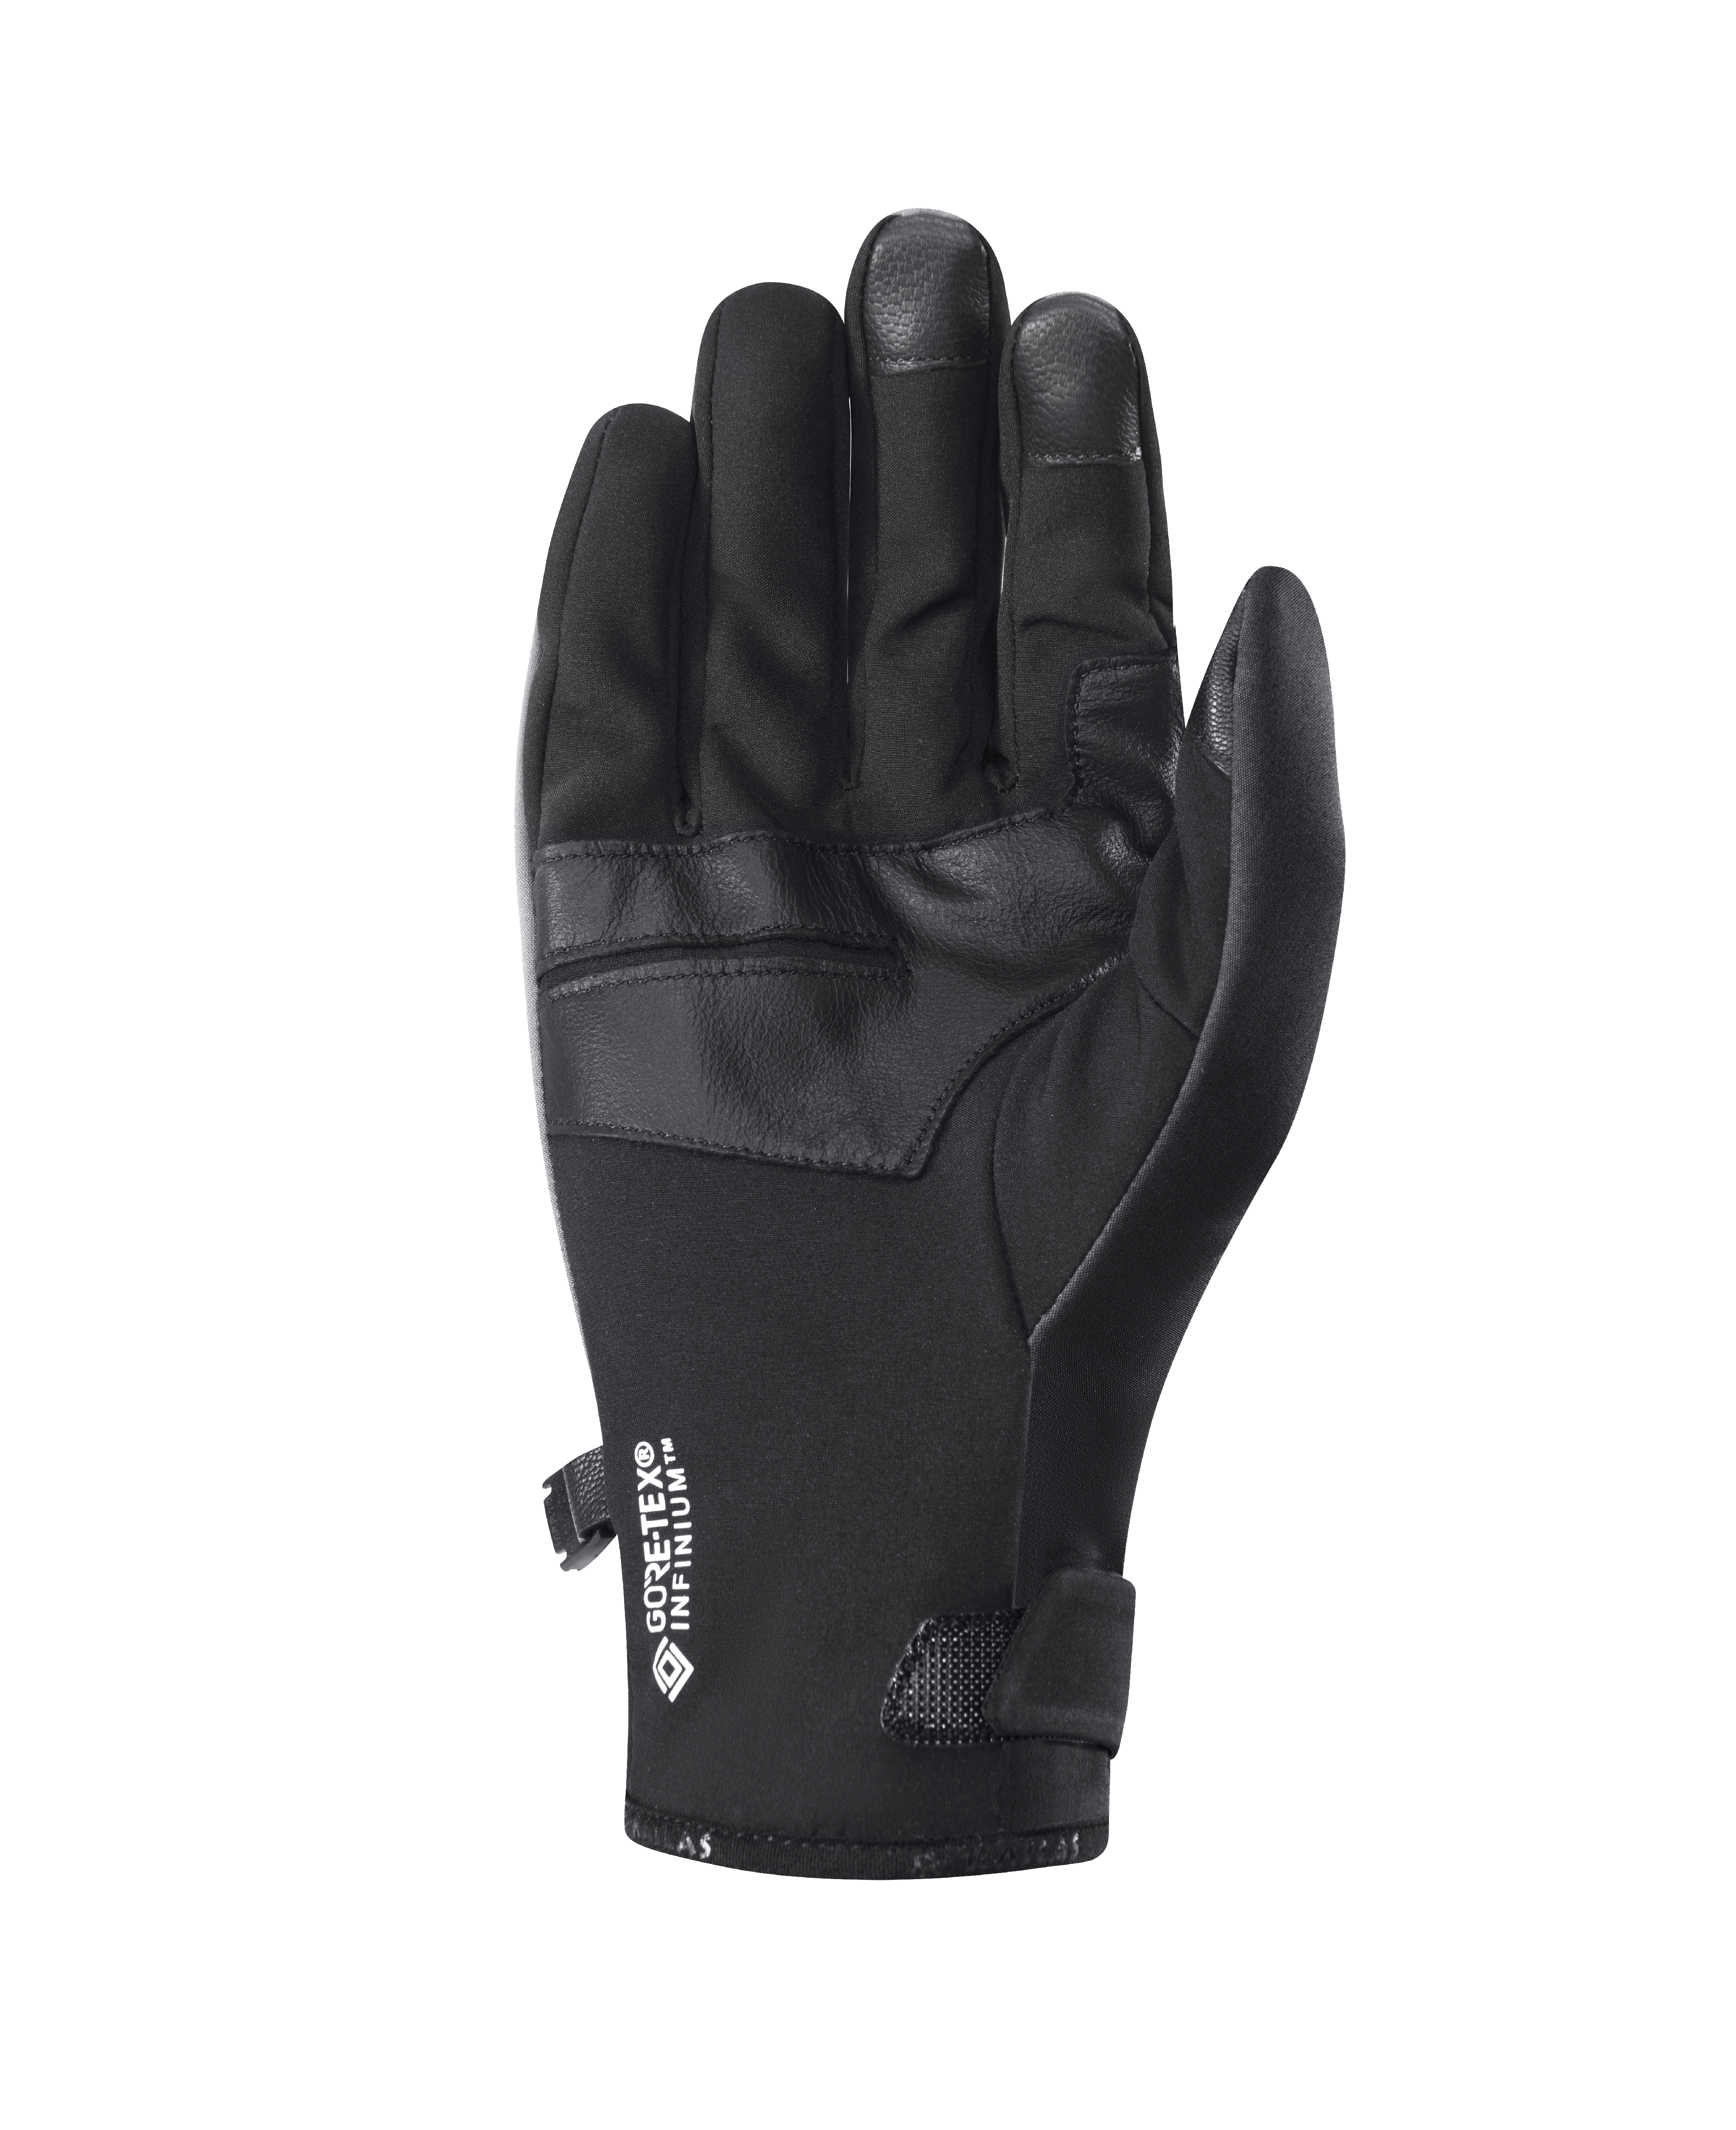 Kailas Wind Master II GORE-TEX Windproof Touchscreen Hiking Gloves Women